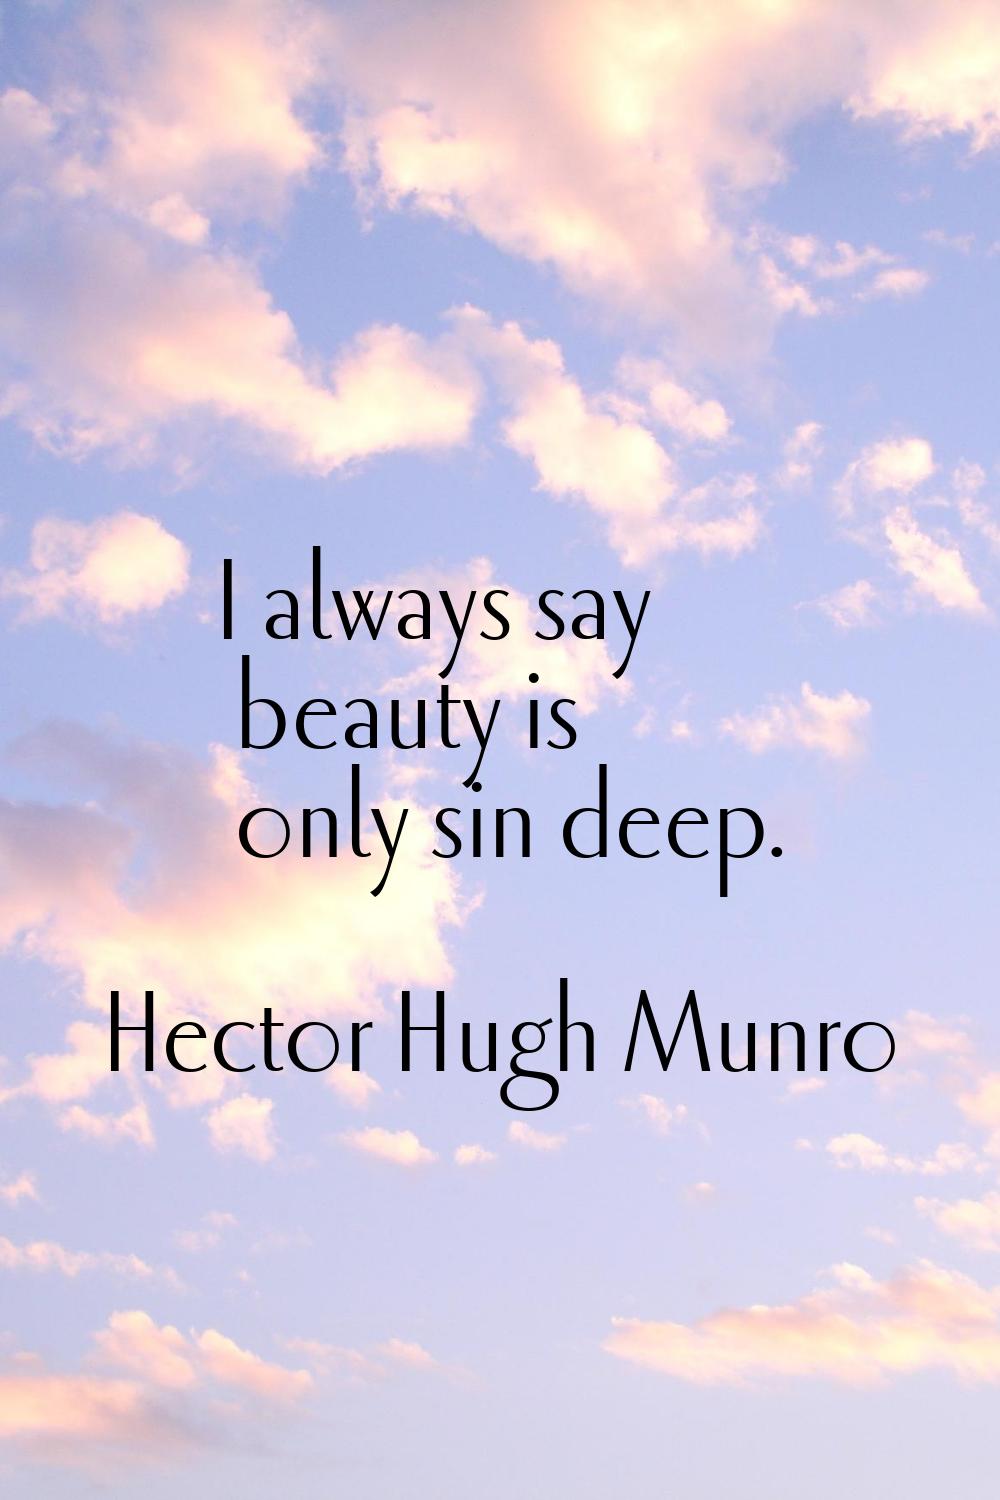 I always say beauty is only sin deep.